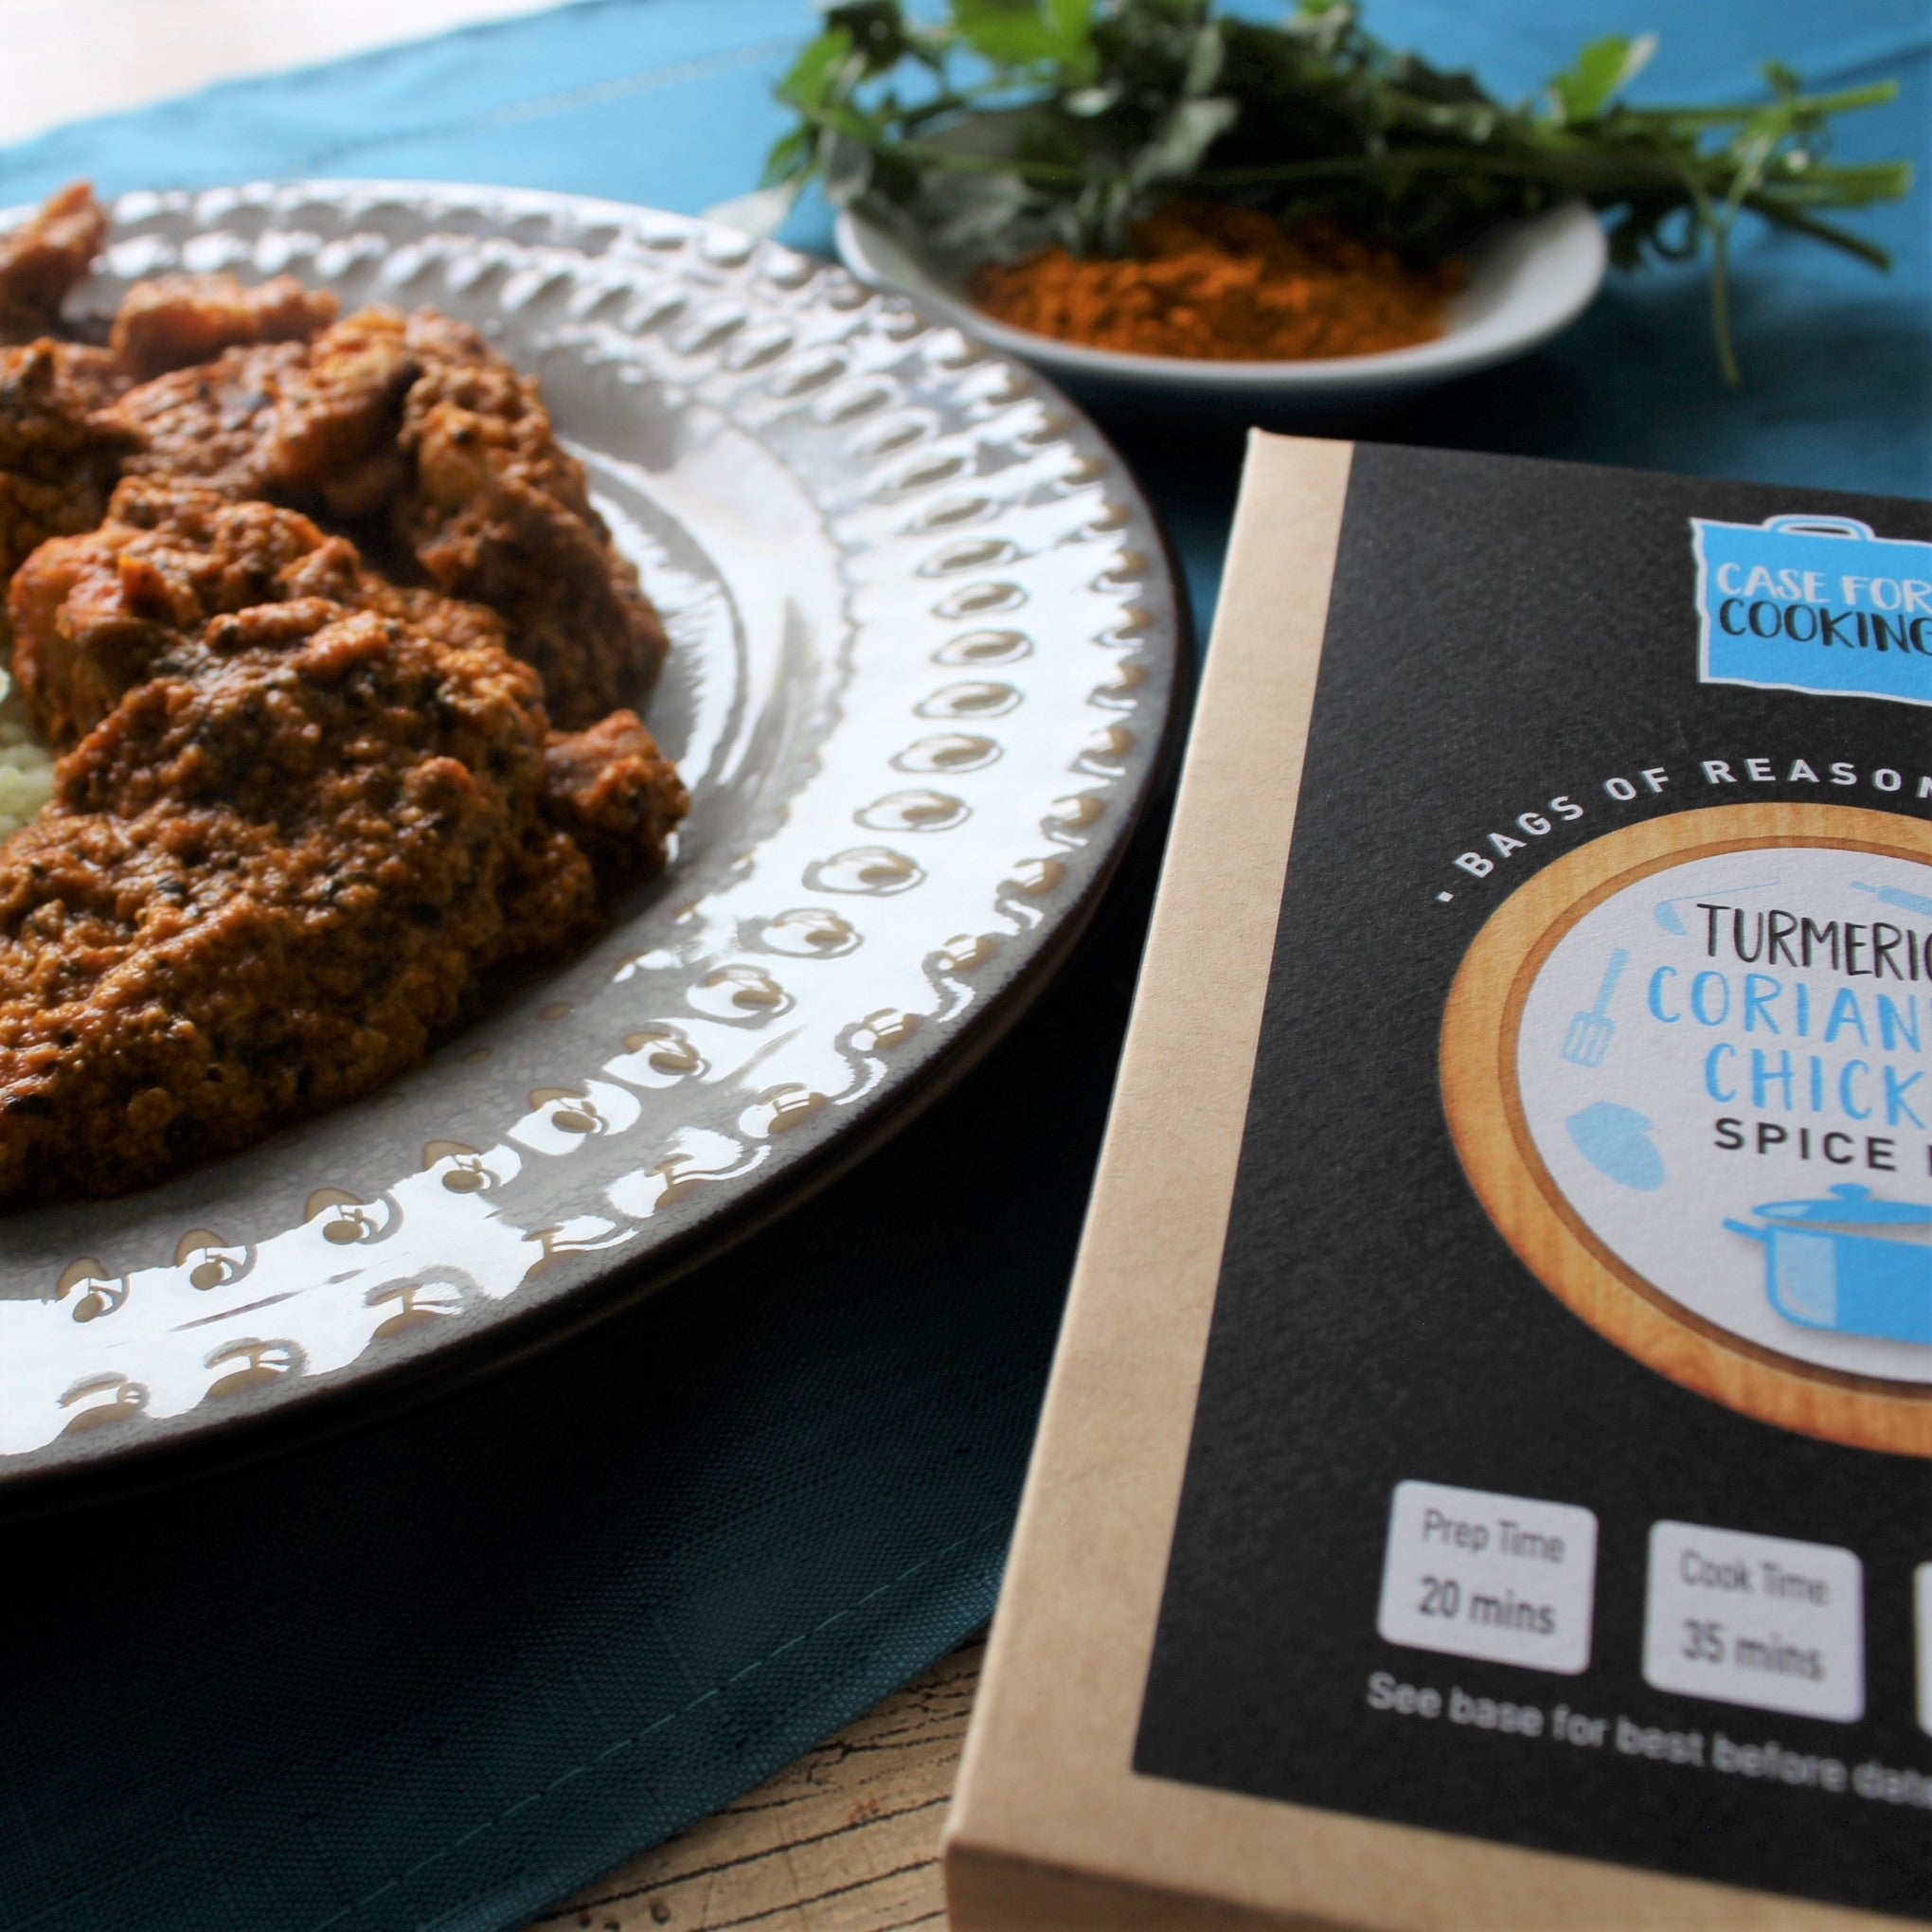 Turmeric & Coriander spice kit and meal from Case for Cooking 